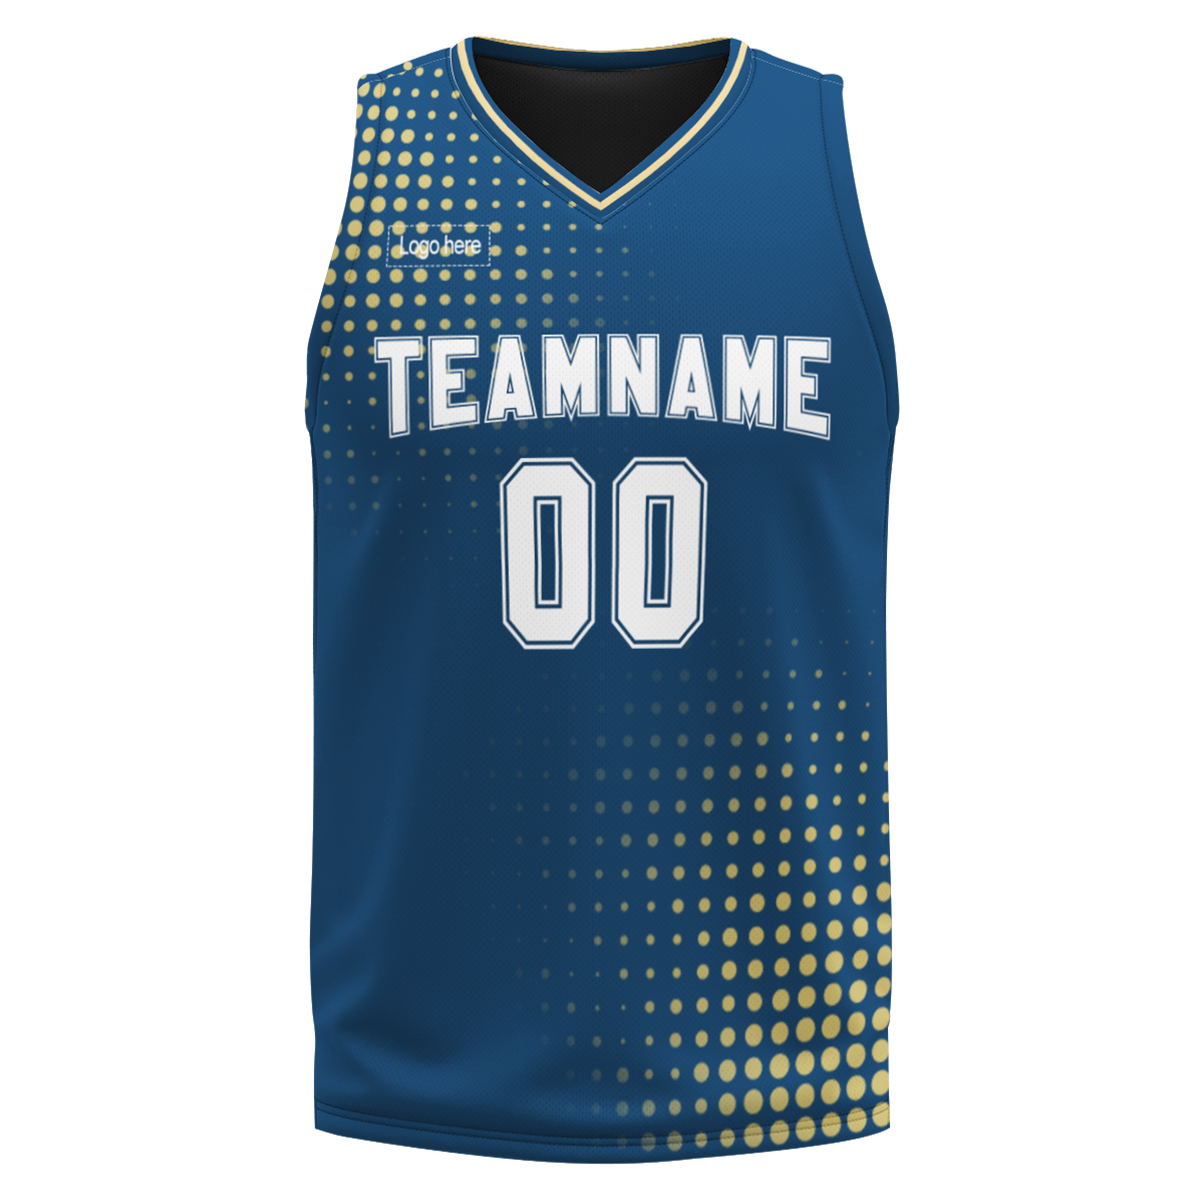 professional-customized-basketball-jersey-uniform-sets-print-on-demand-quick-dry-breathable-basketball-shirt-suits-at-cj-pod-4